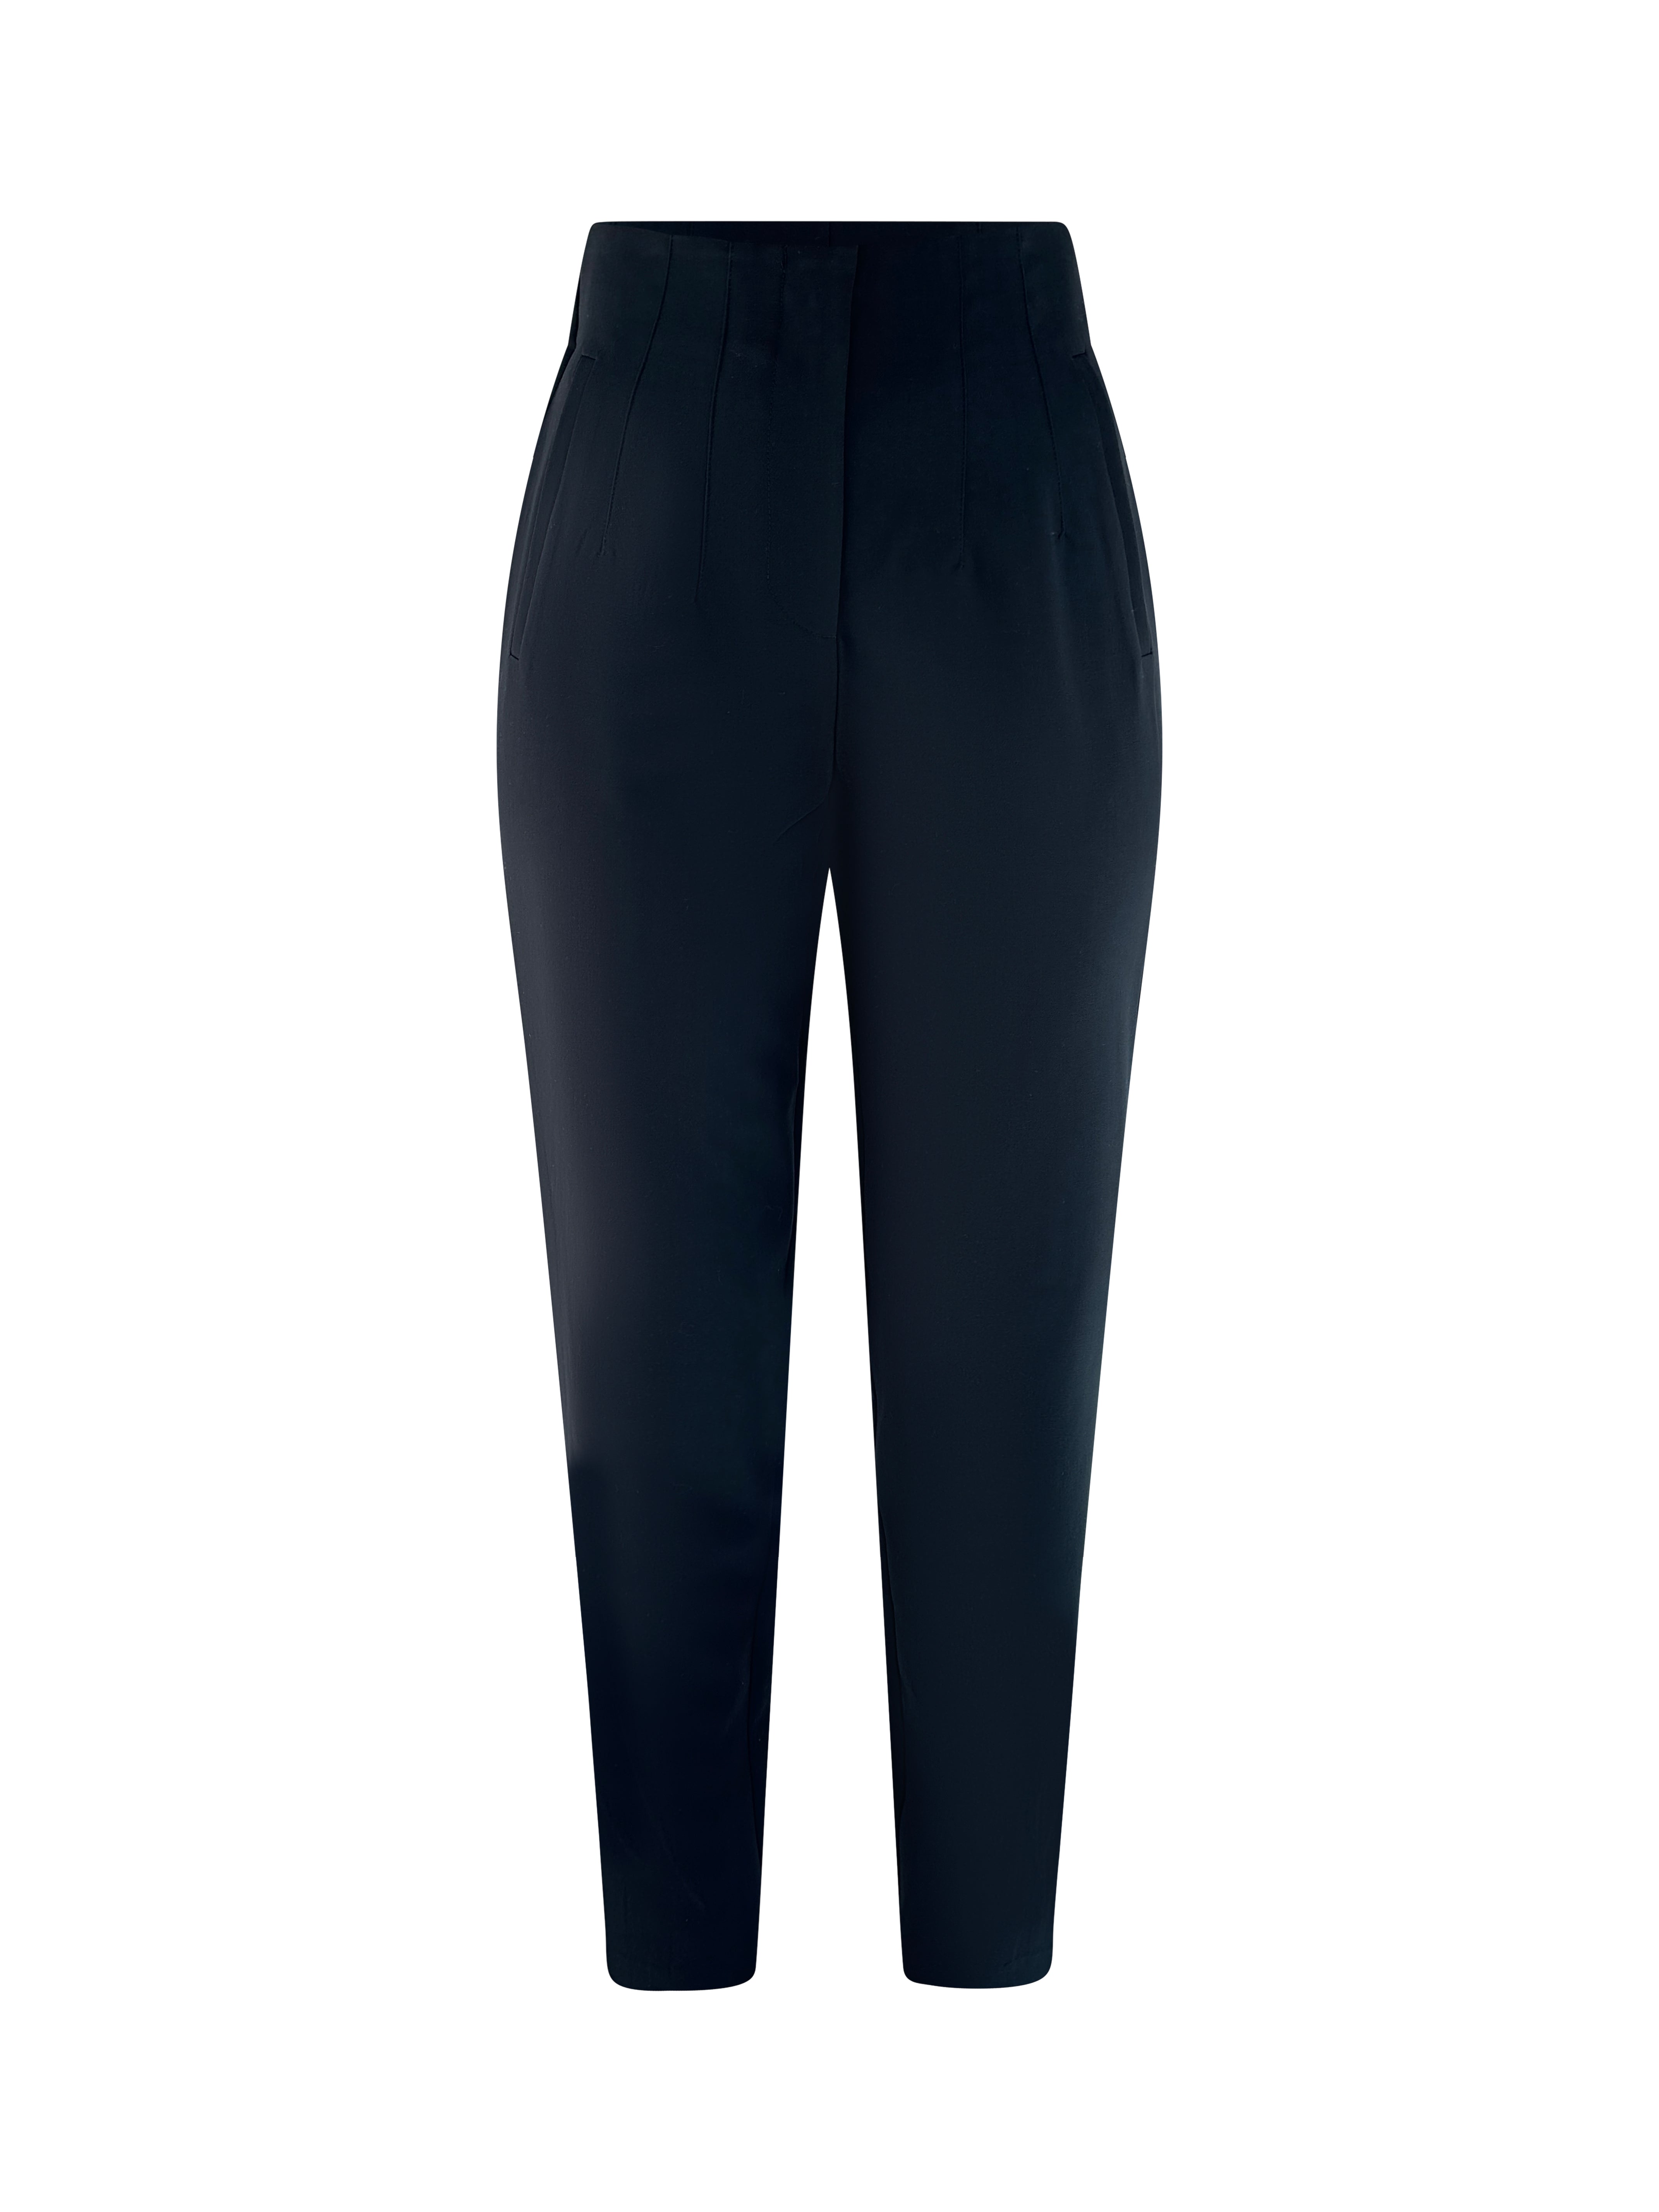 Buy Ankle Length Women Trouser and Formal Pant Dark Grey at Amazon.in